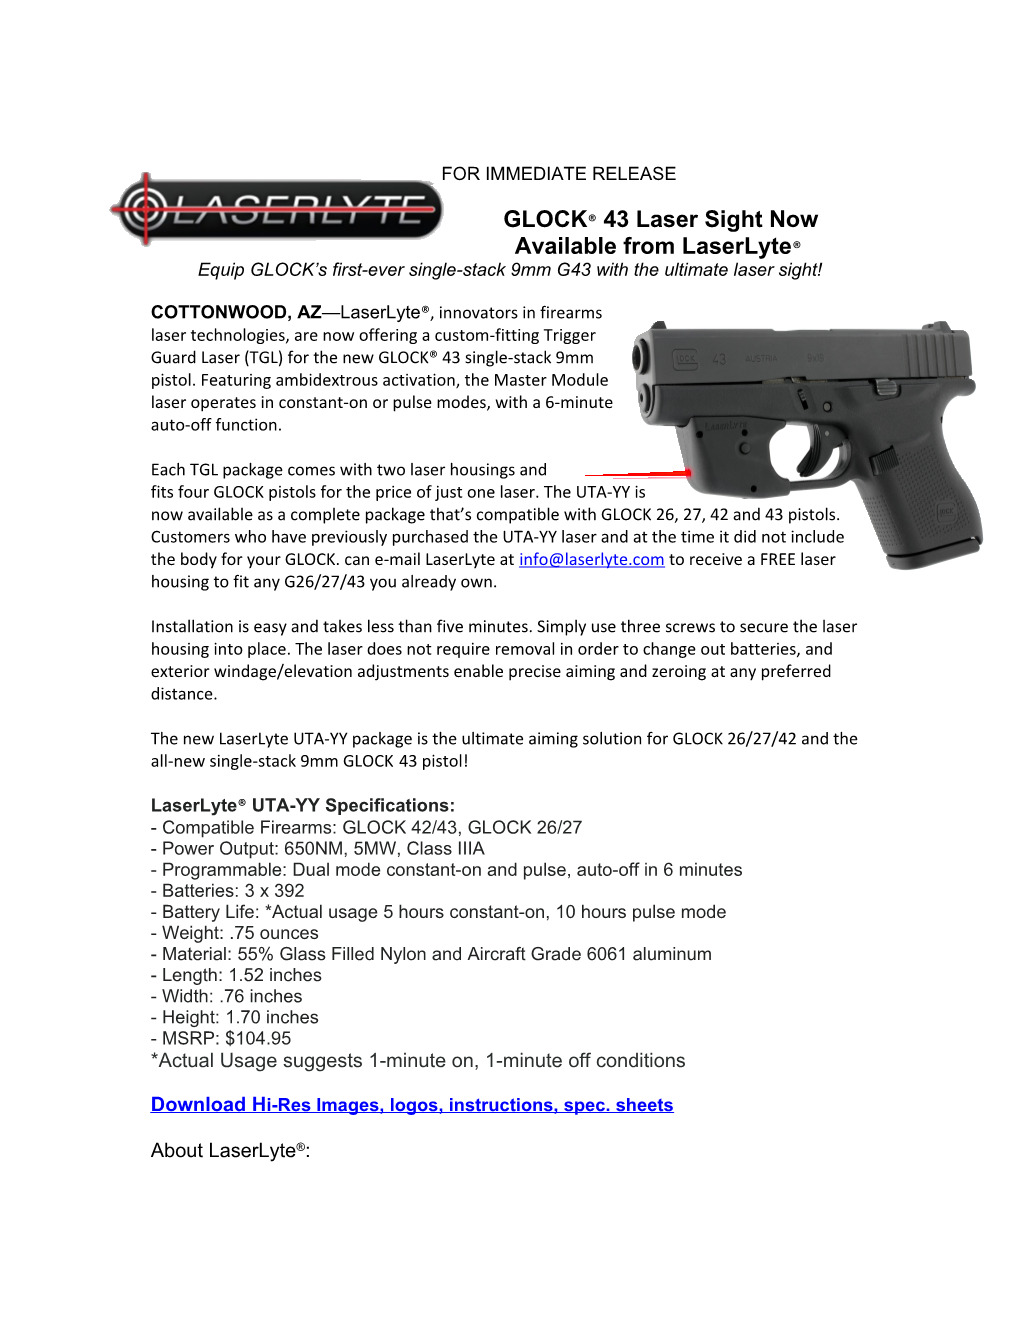 GLOCK 43 Laser Sight Now Available from Laserlyte